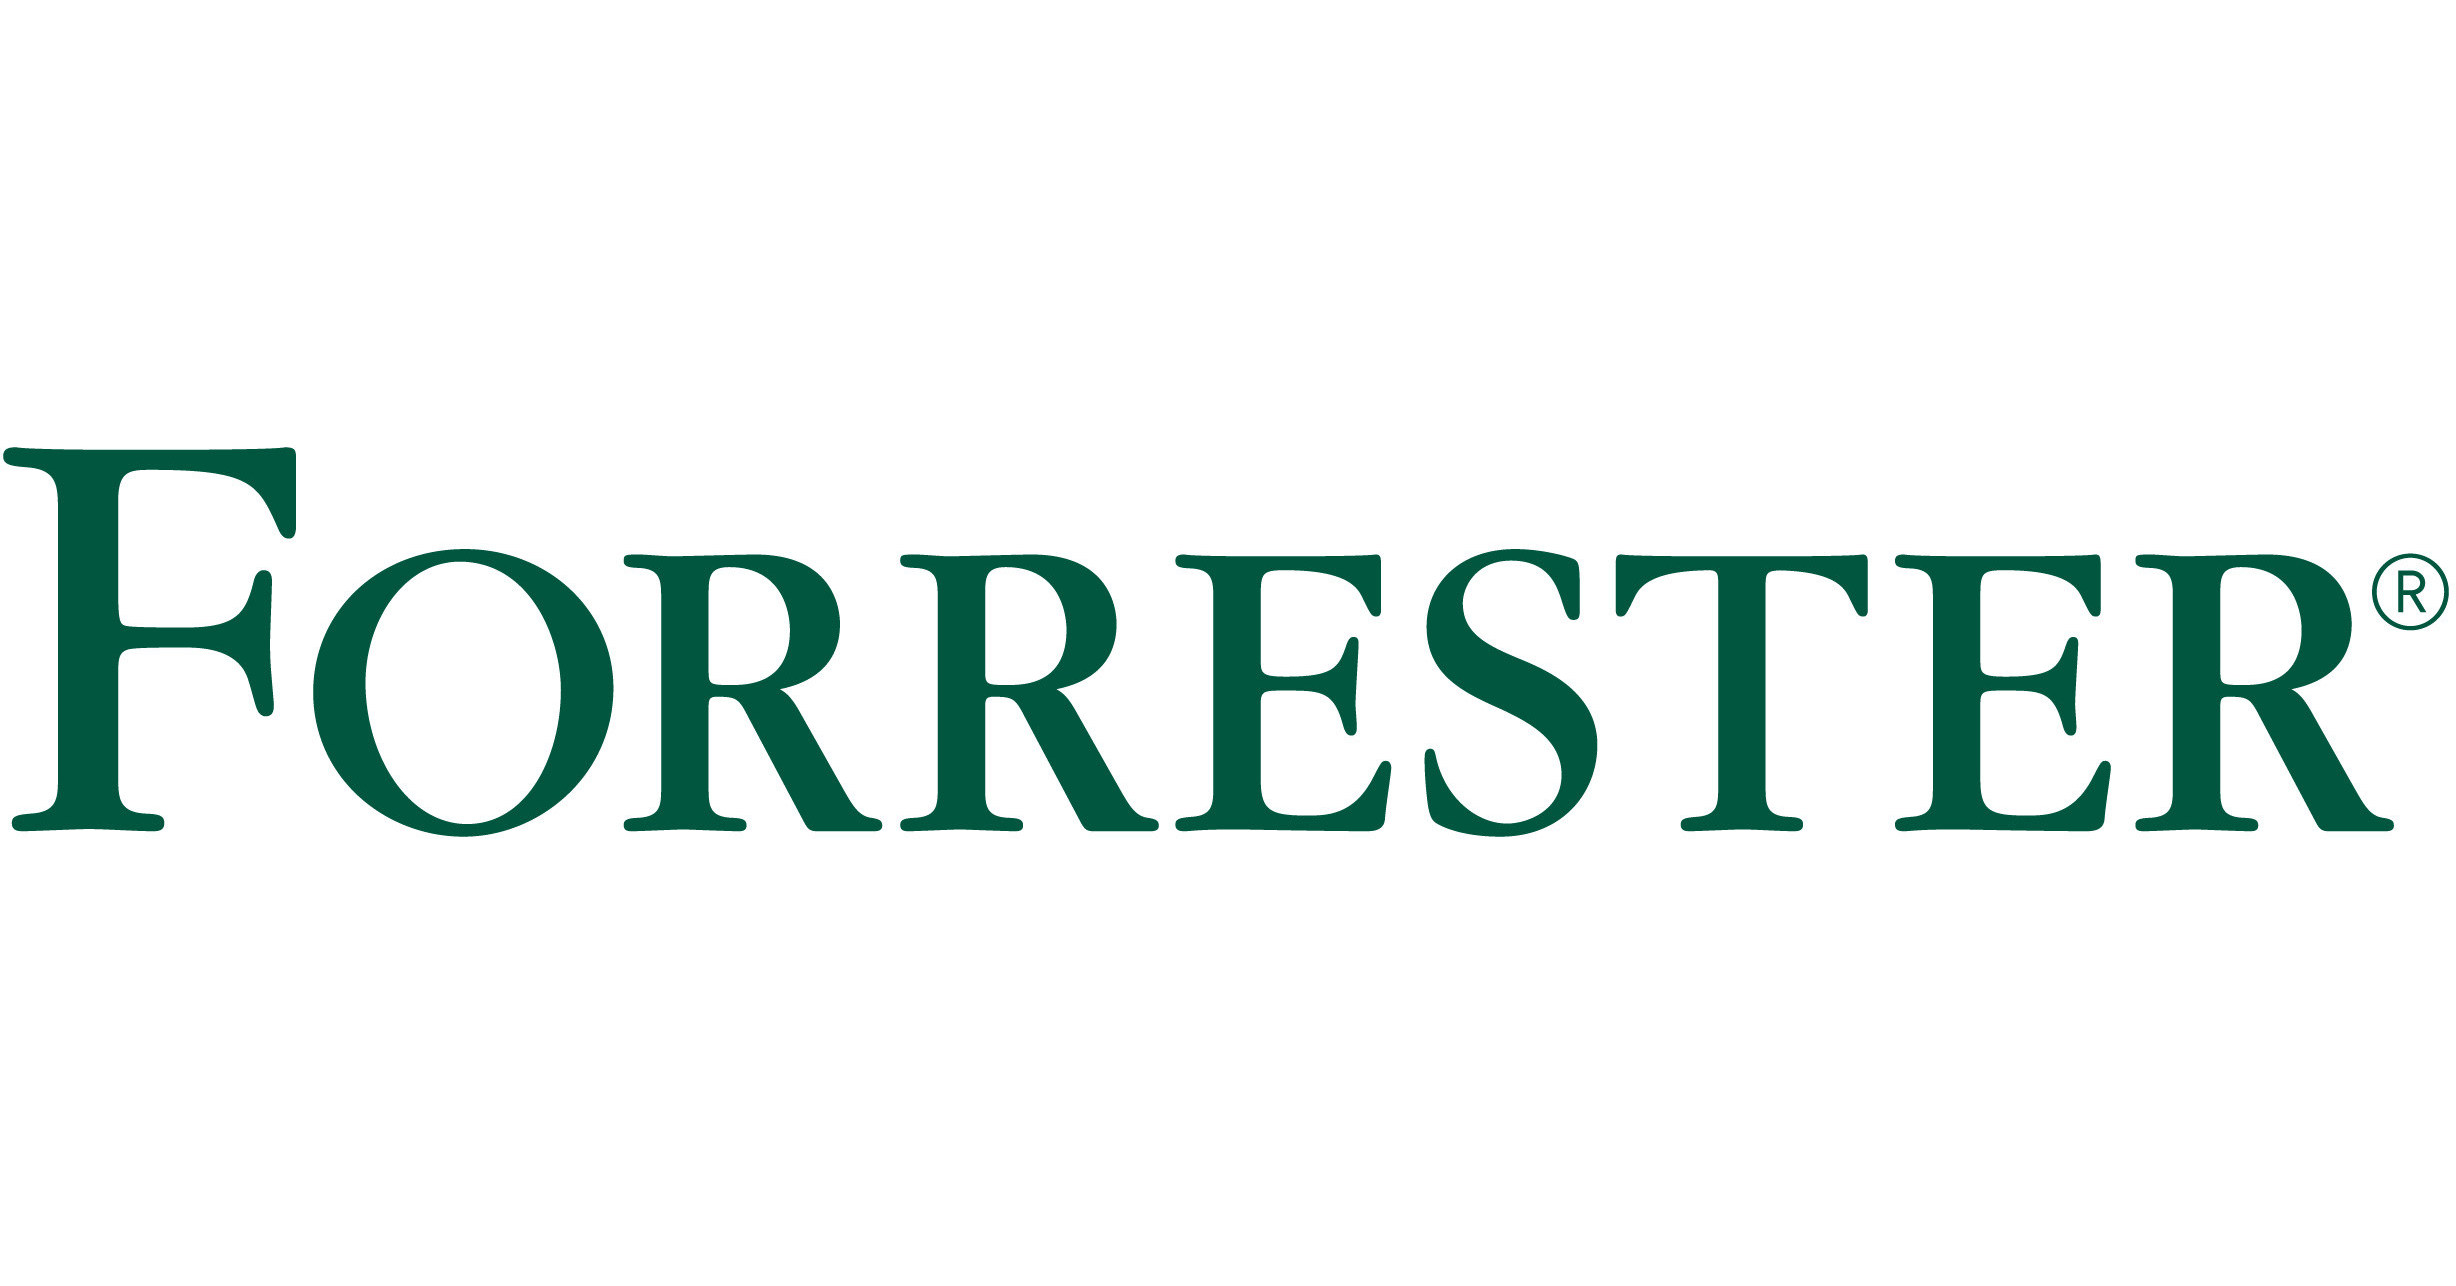 Forrester Announces Full Conference Agenda For Data Strategy & Insights 2022